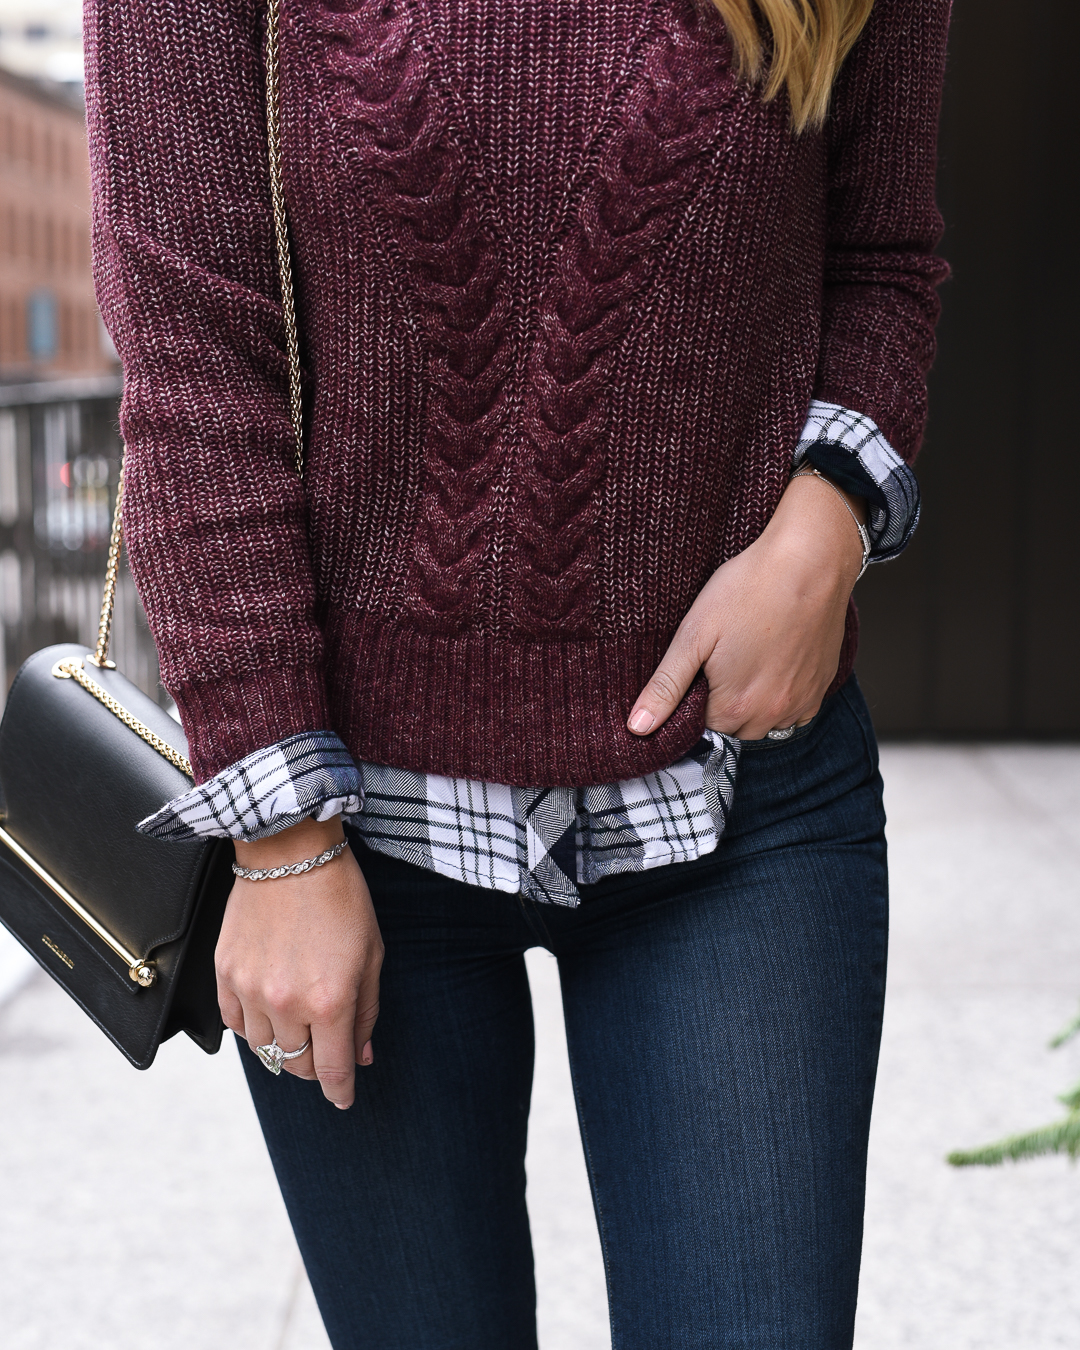 how to layer plaid and sweaters - Best Cute Affordable Sweater for Layering by Chicago style blogger Visions of Vogue